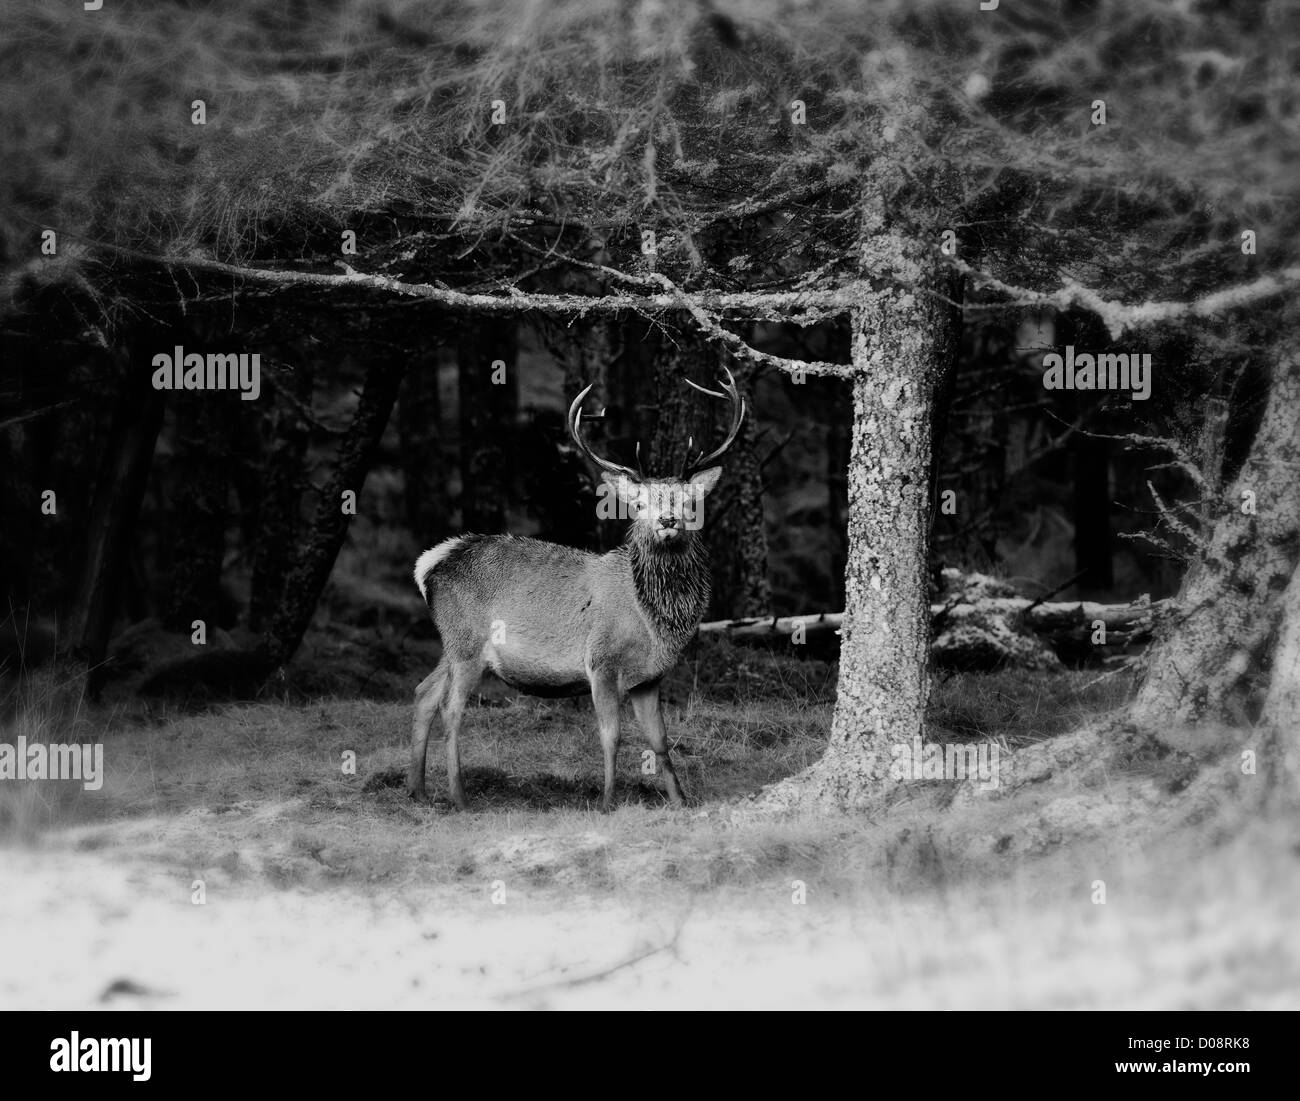 A red deer stag soon after the rut roams the scottish highlands , this black and white photograph has a vintage feel to it. Stock Photo